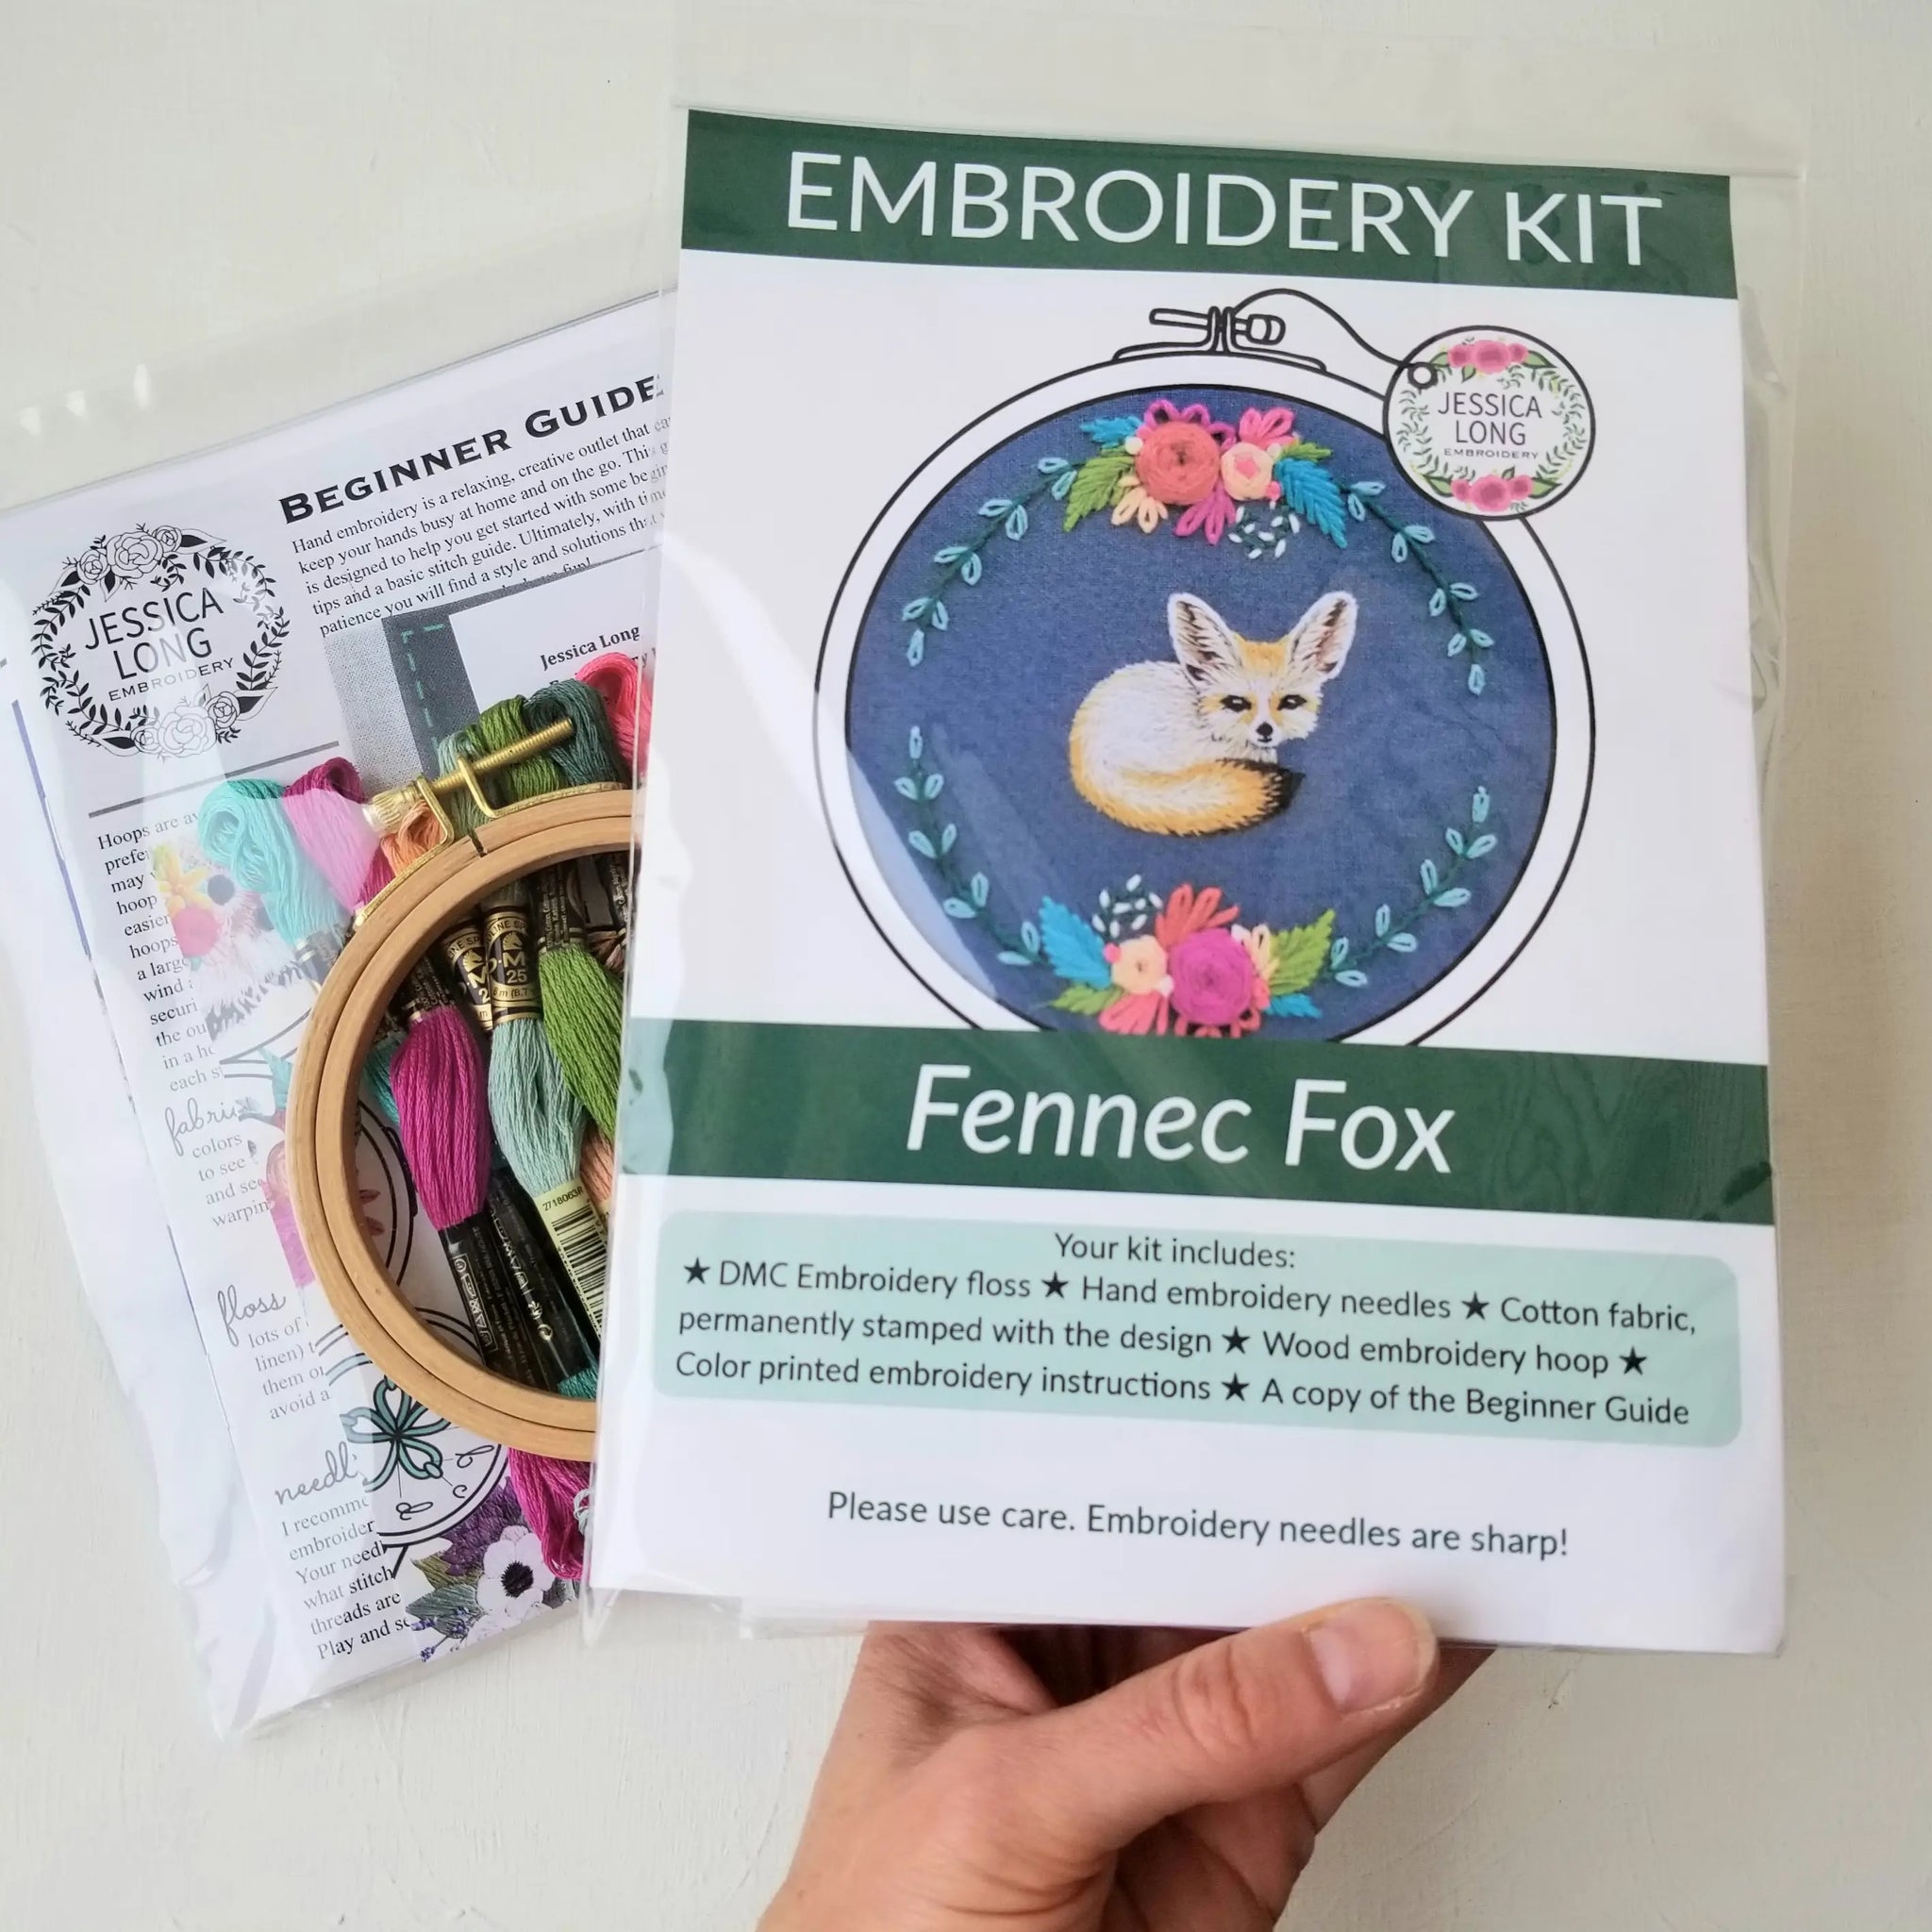 Fennec Fox Hand Embroidery Kit - Stitched Modern